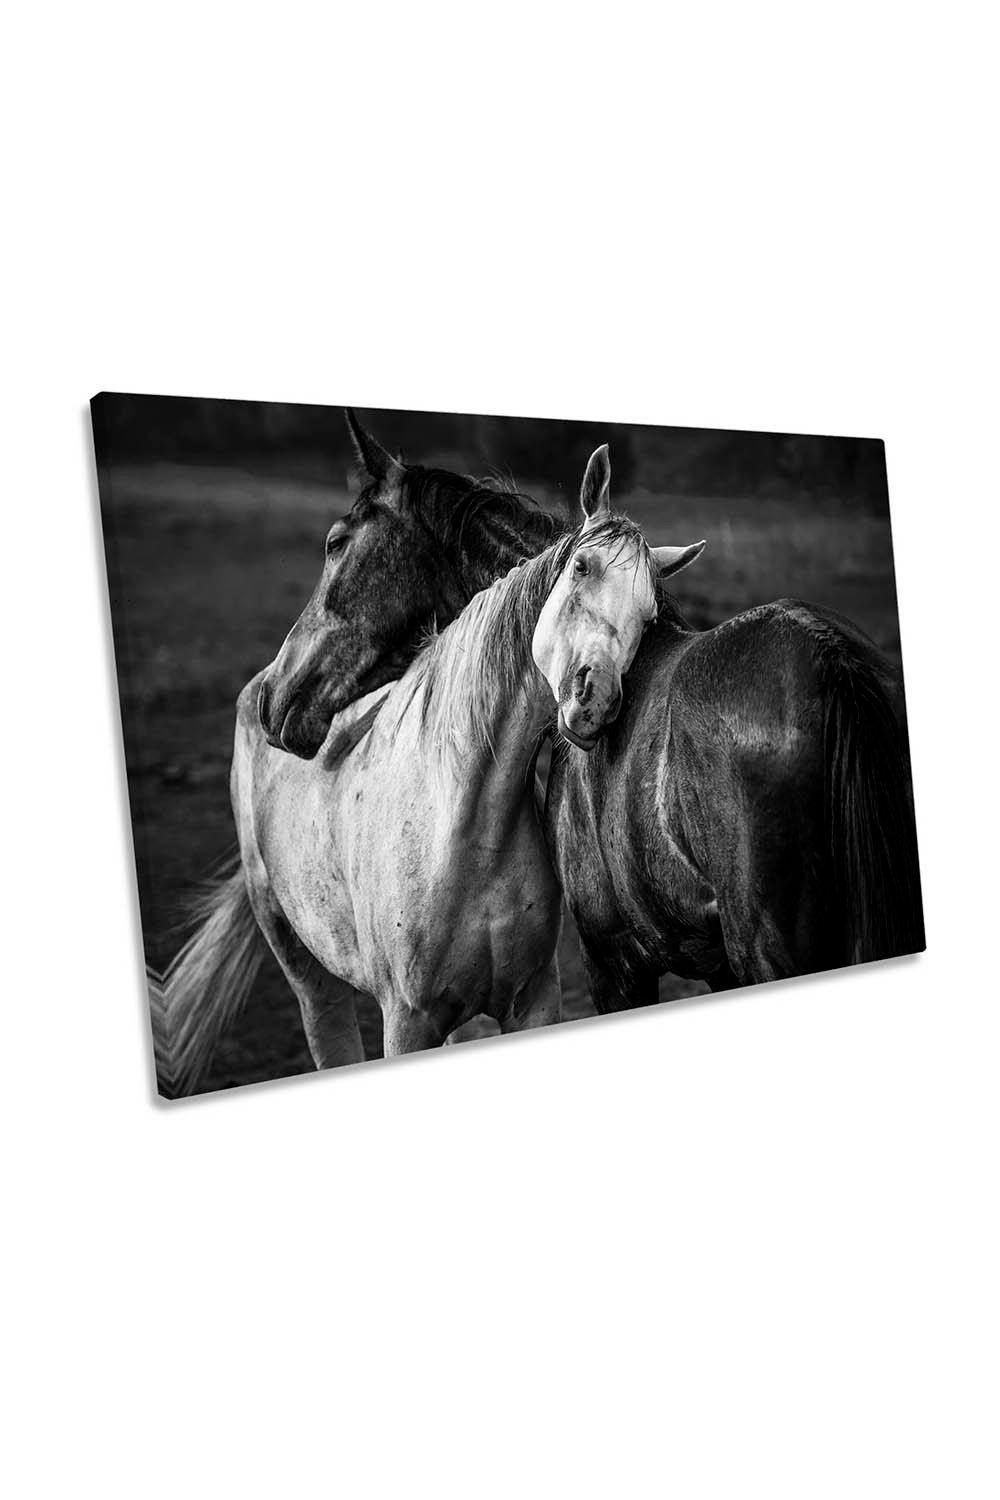 Horses Friendship Family Black and White Canvas Wall Art Picture Print